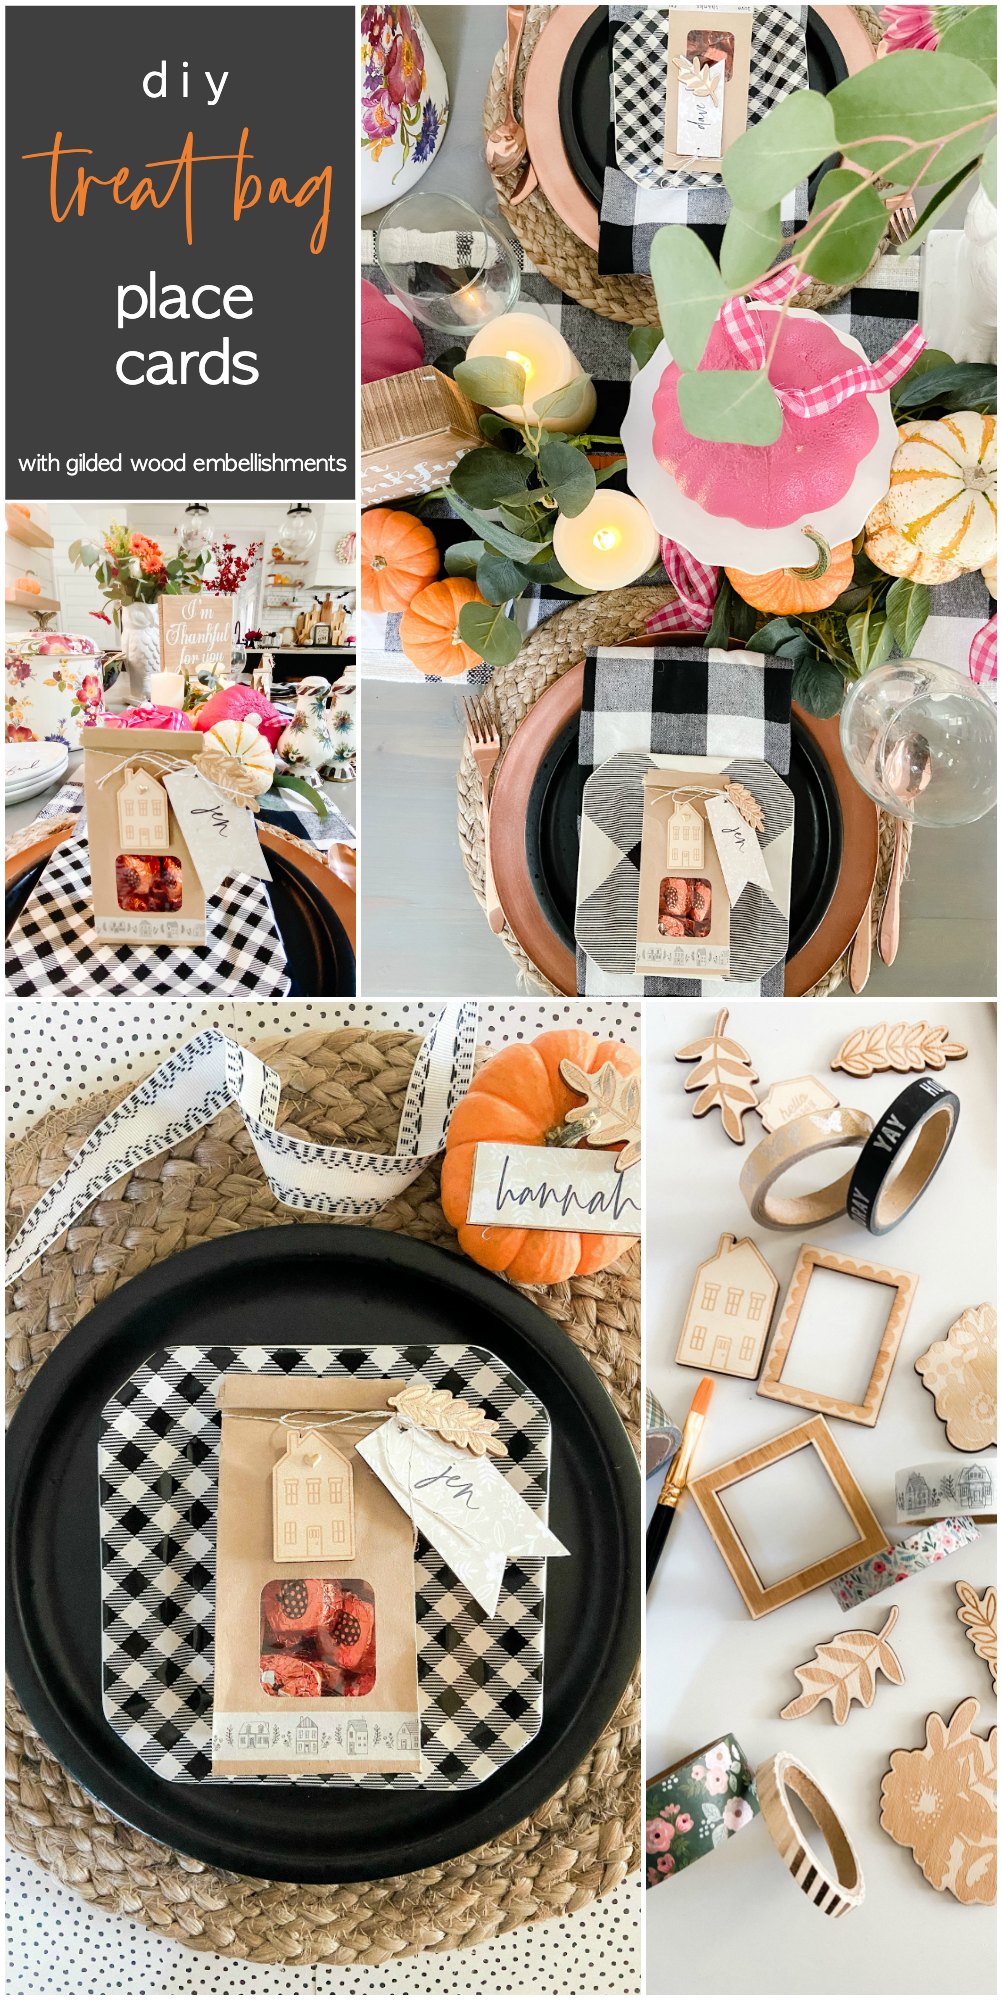 Thanksgiving Treat Bag Place Cards with Gilded Wood Embellishments. Create place cards and treat bags for your fall dinners. Guests will know where to sit AND have some special treats to take home after dinner! 